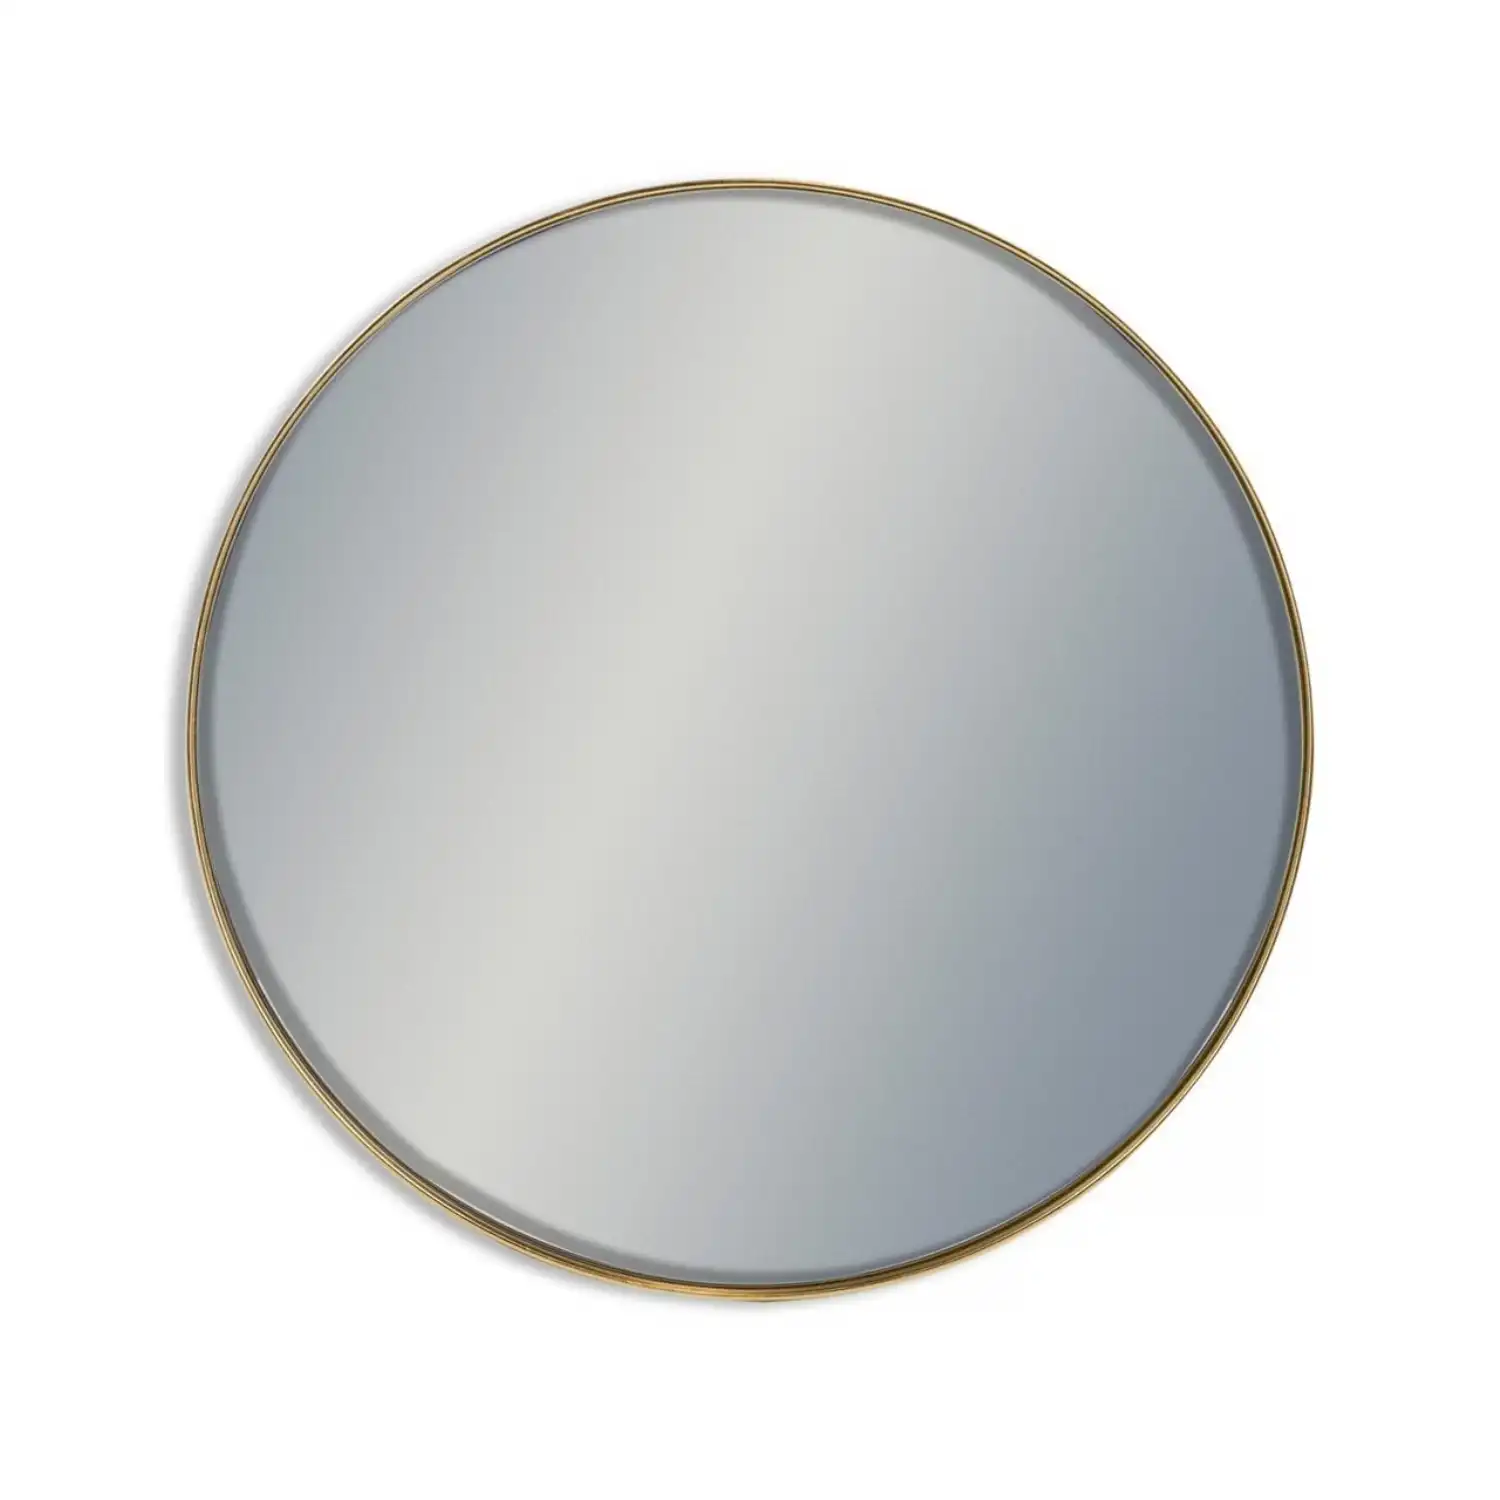 Gold Framed Metal Extra Large Round Arden Wall Mirror